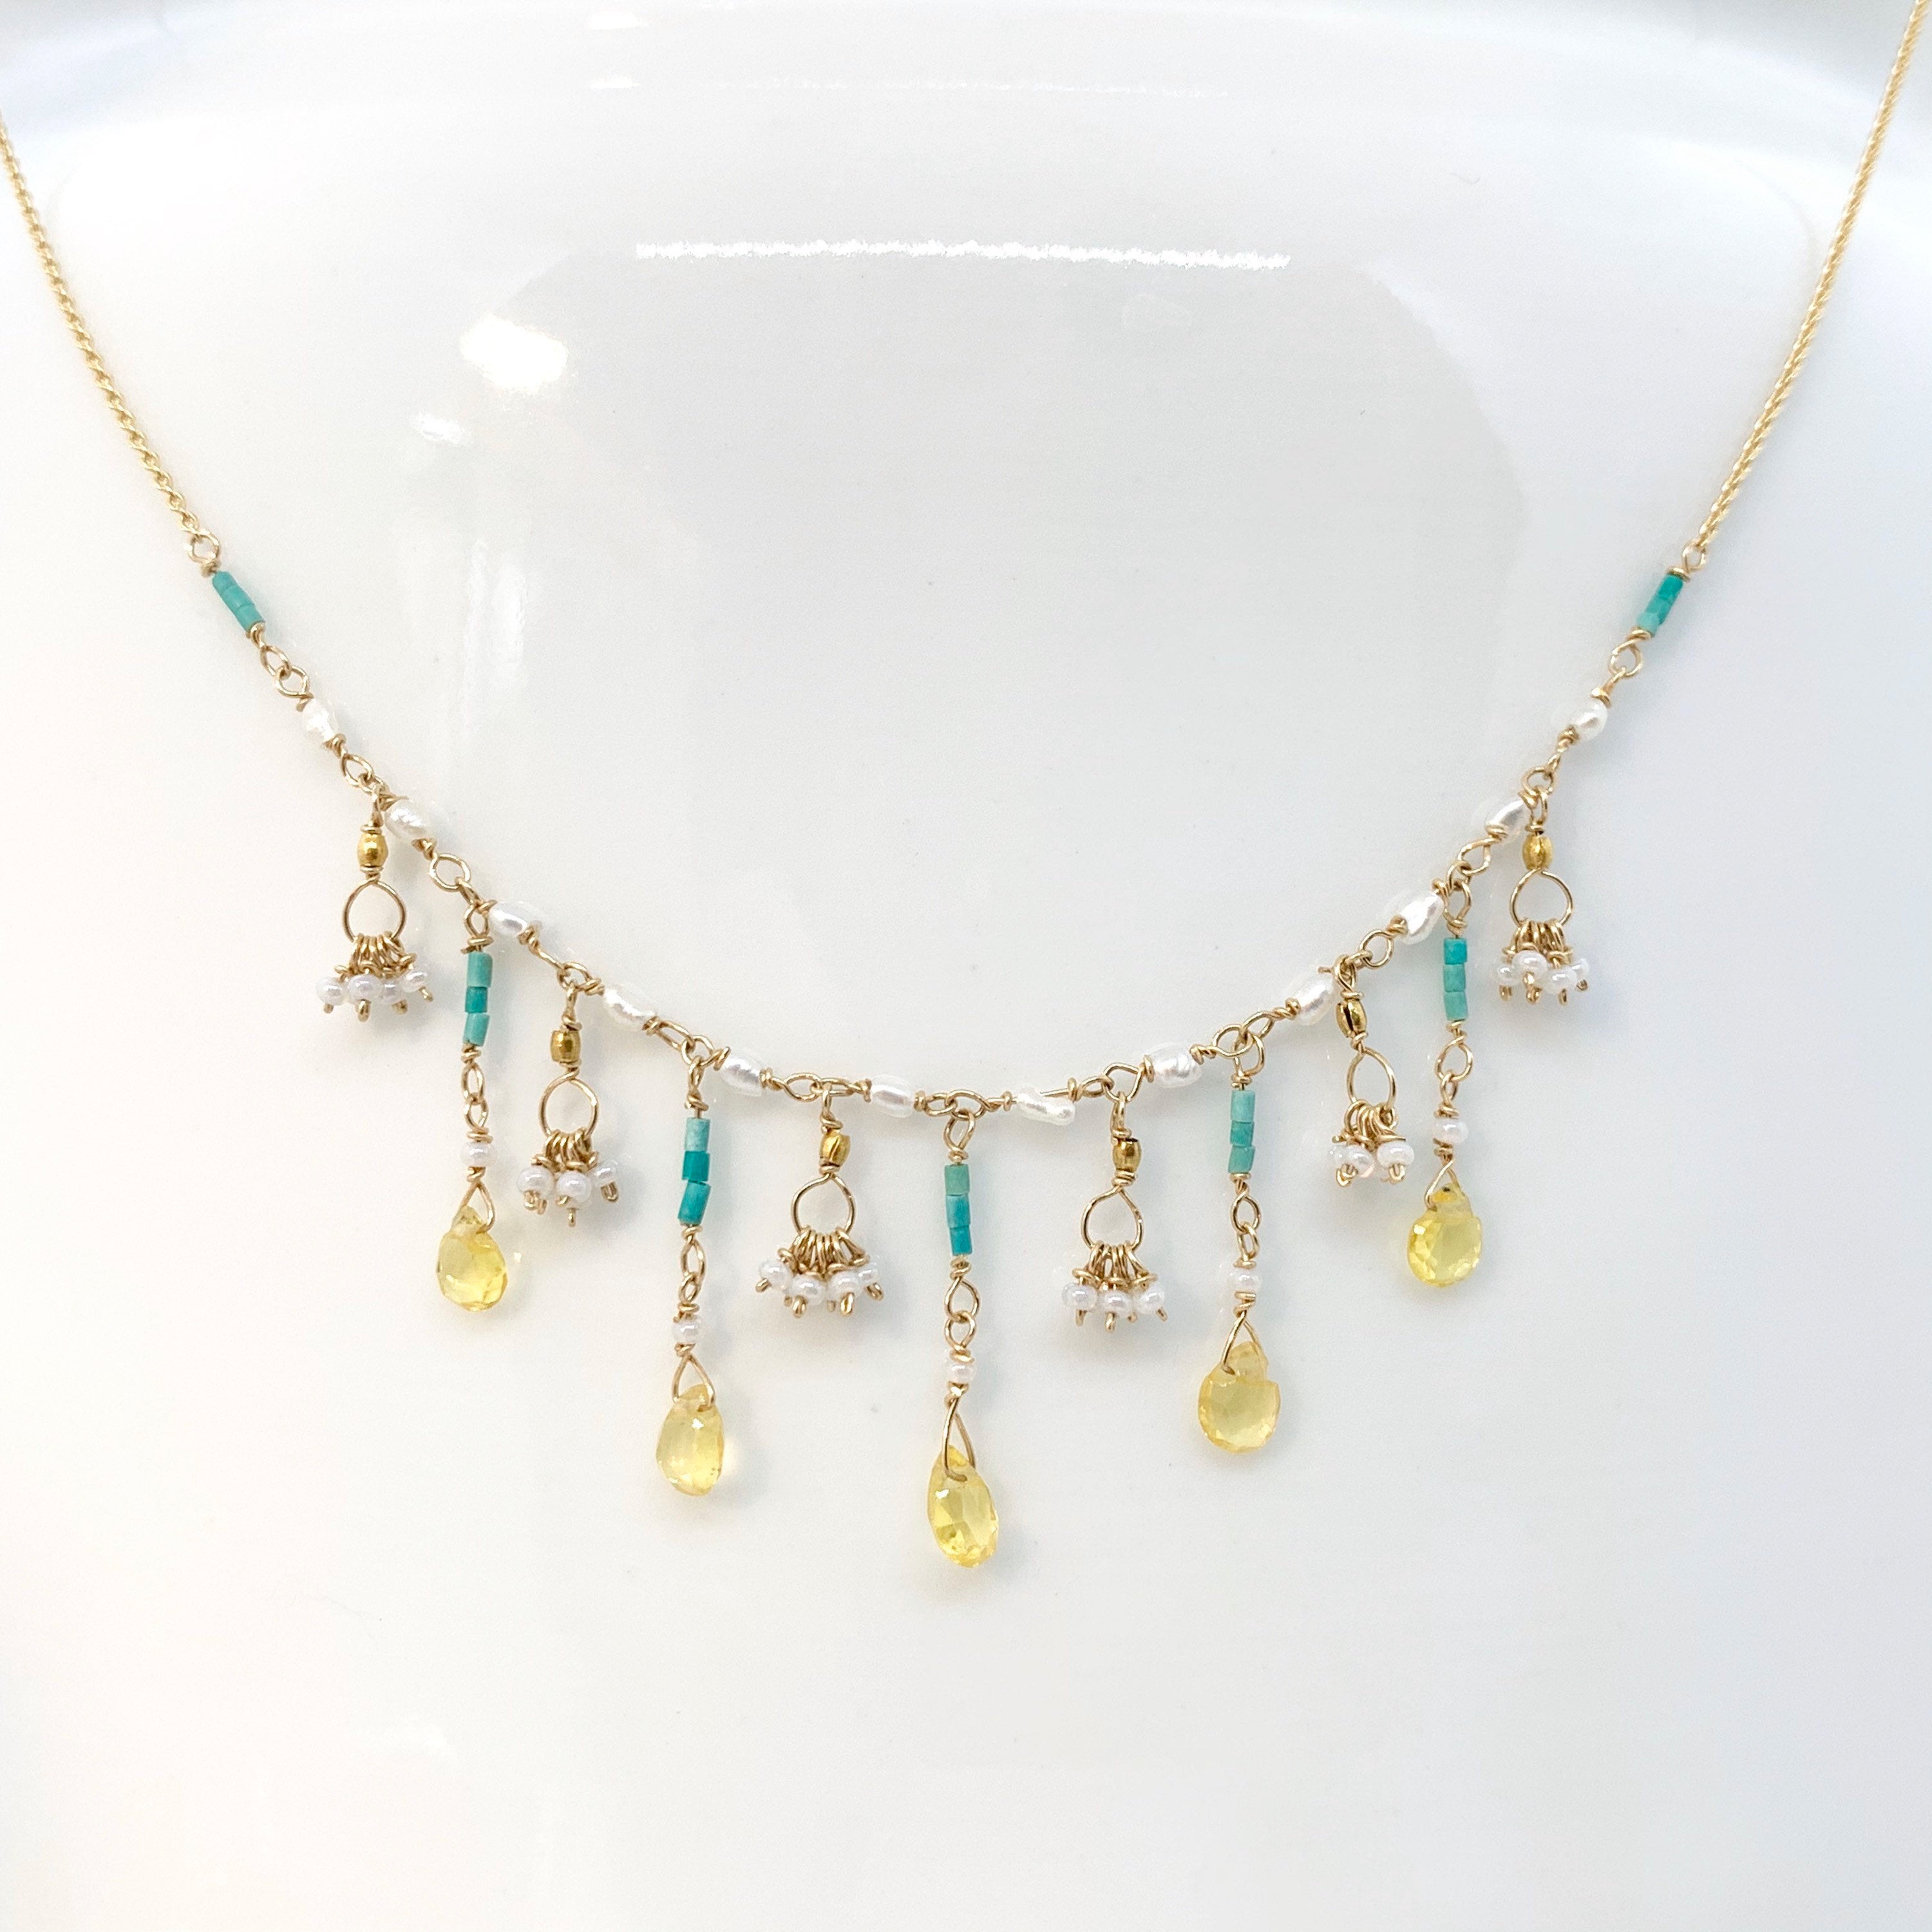 14k Gold Chain Necklace w/ Yellow Sapphires, 18k Gold Nuggets, Keshi Pearls, Turquoise & Antique Italian Beads